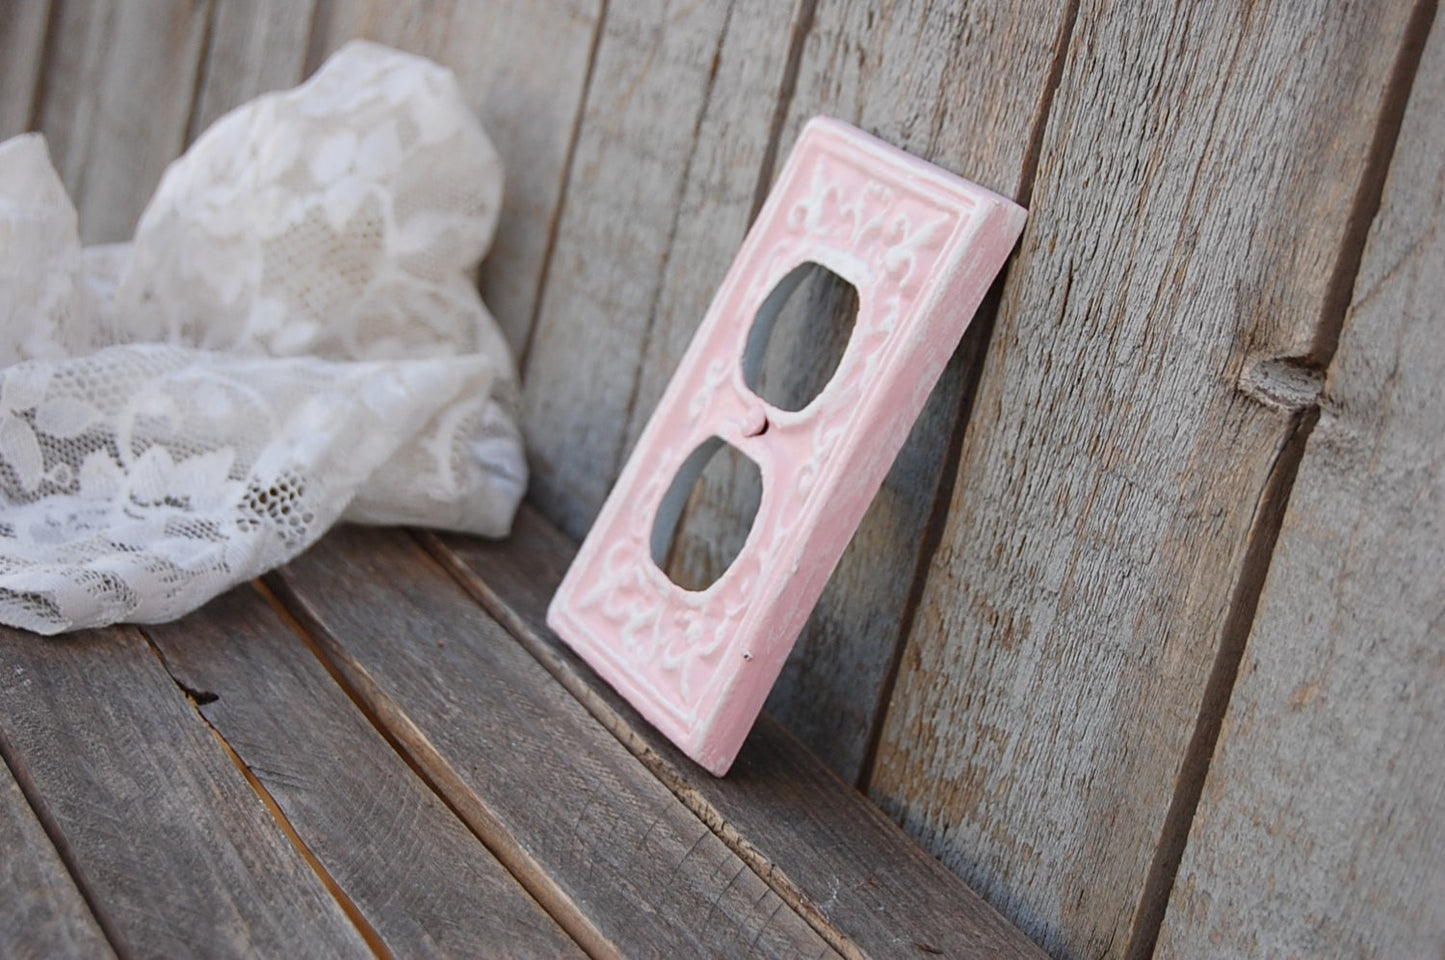 Pink and white double outlet cover - The Vintage Artistry